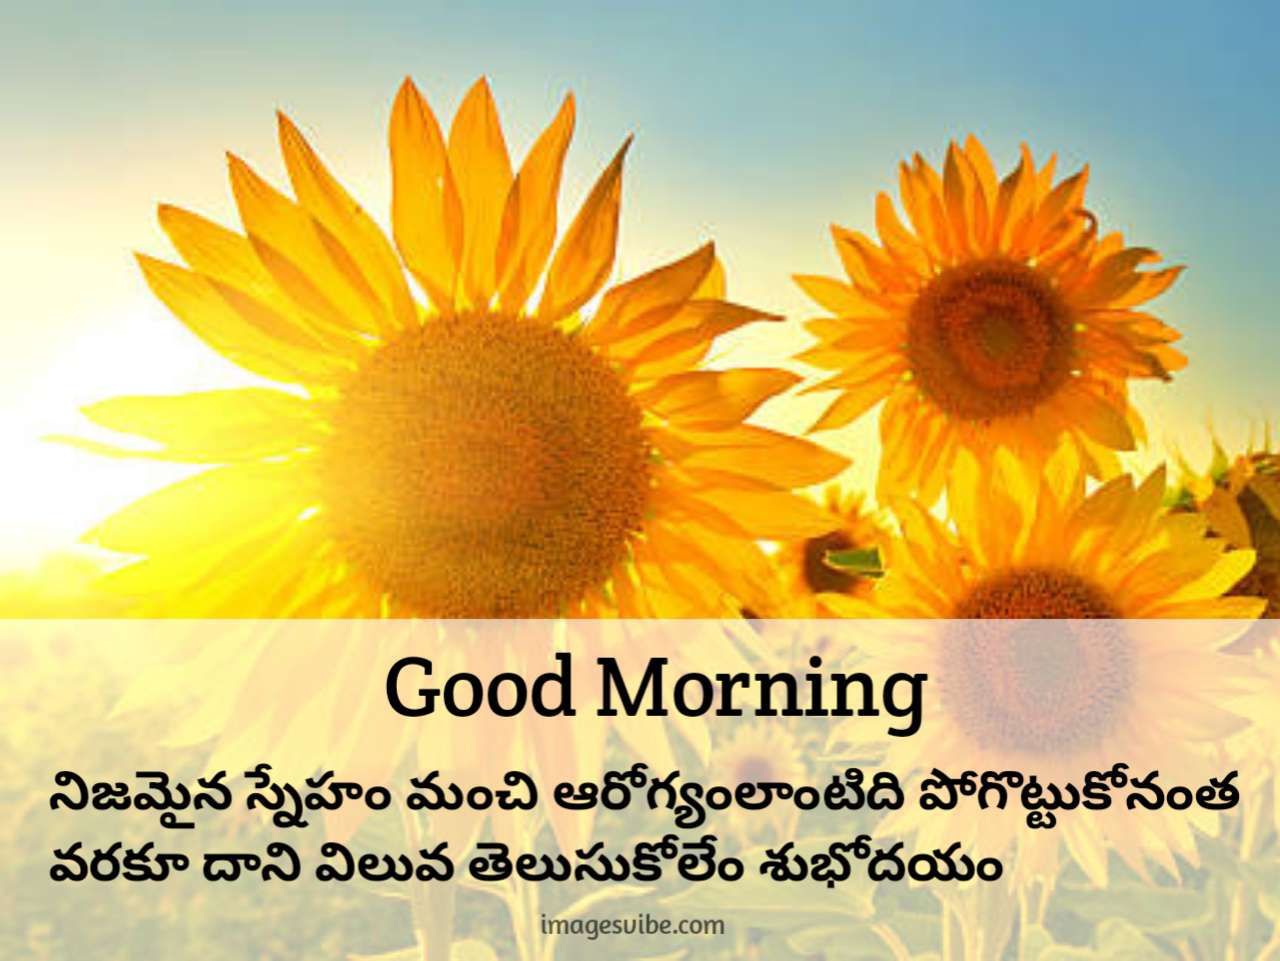 Beautiful Good Morning Telugu Images & Quotes in 2022 - Images Vibe